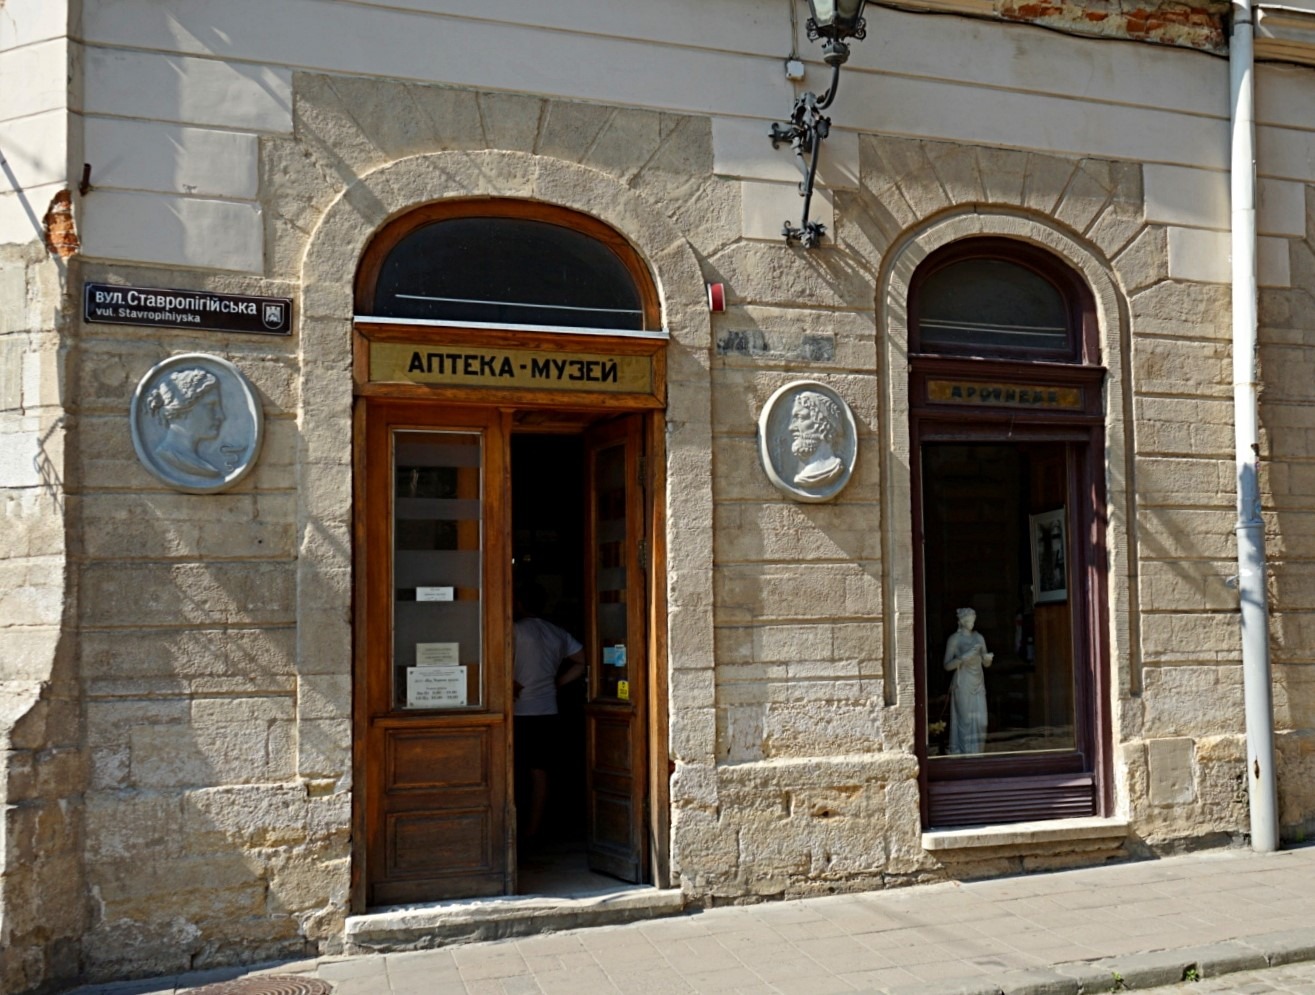 The entrance to the Pharmacy Museum in Lviv